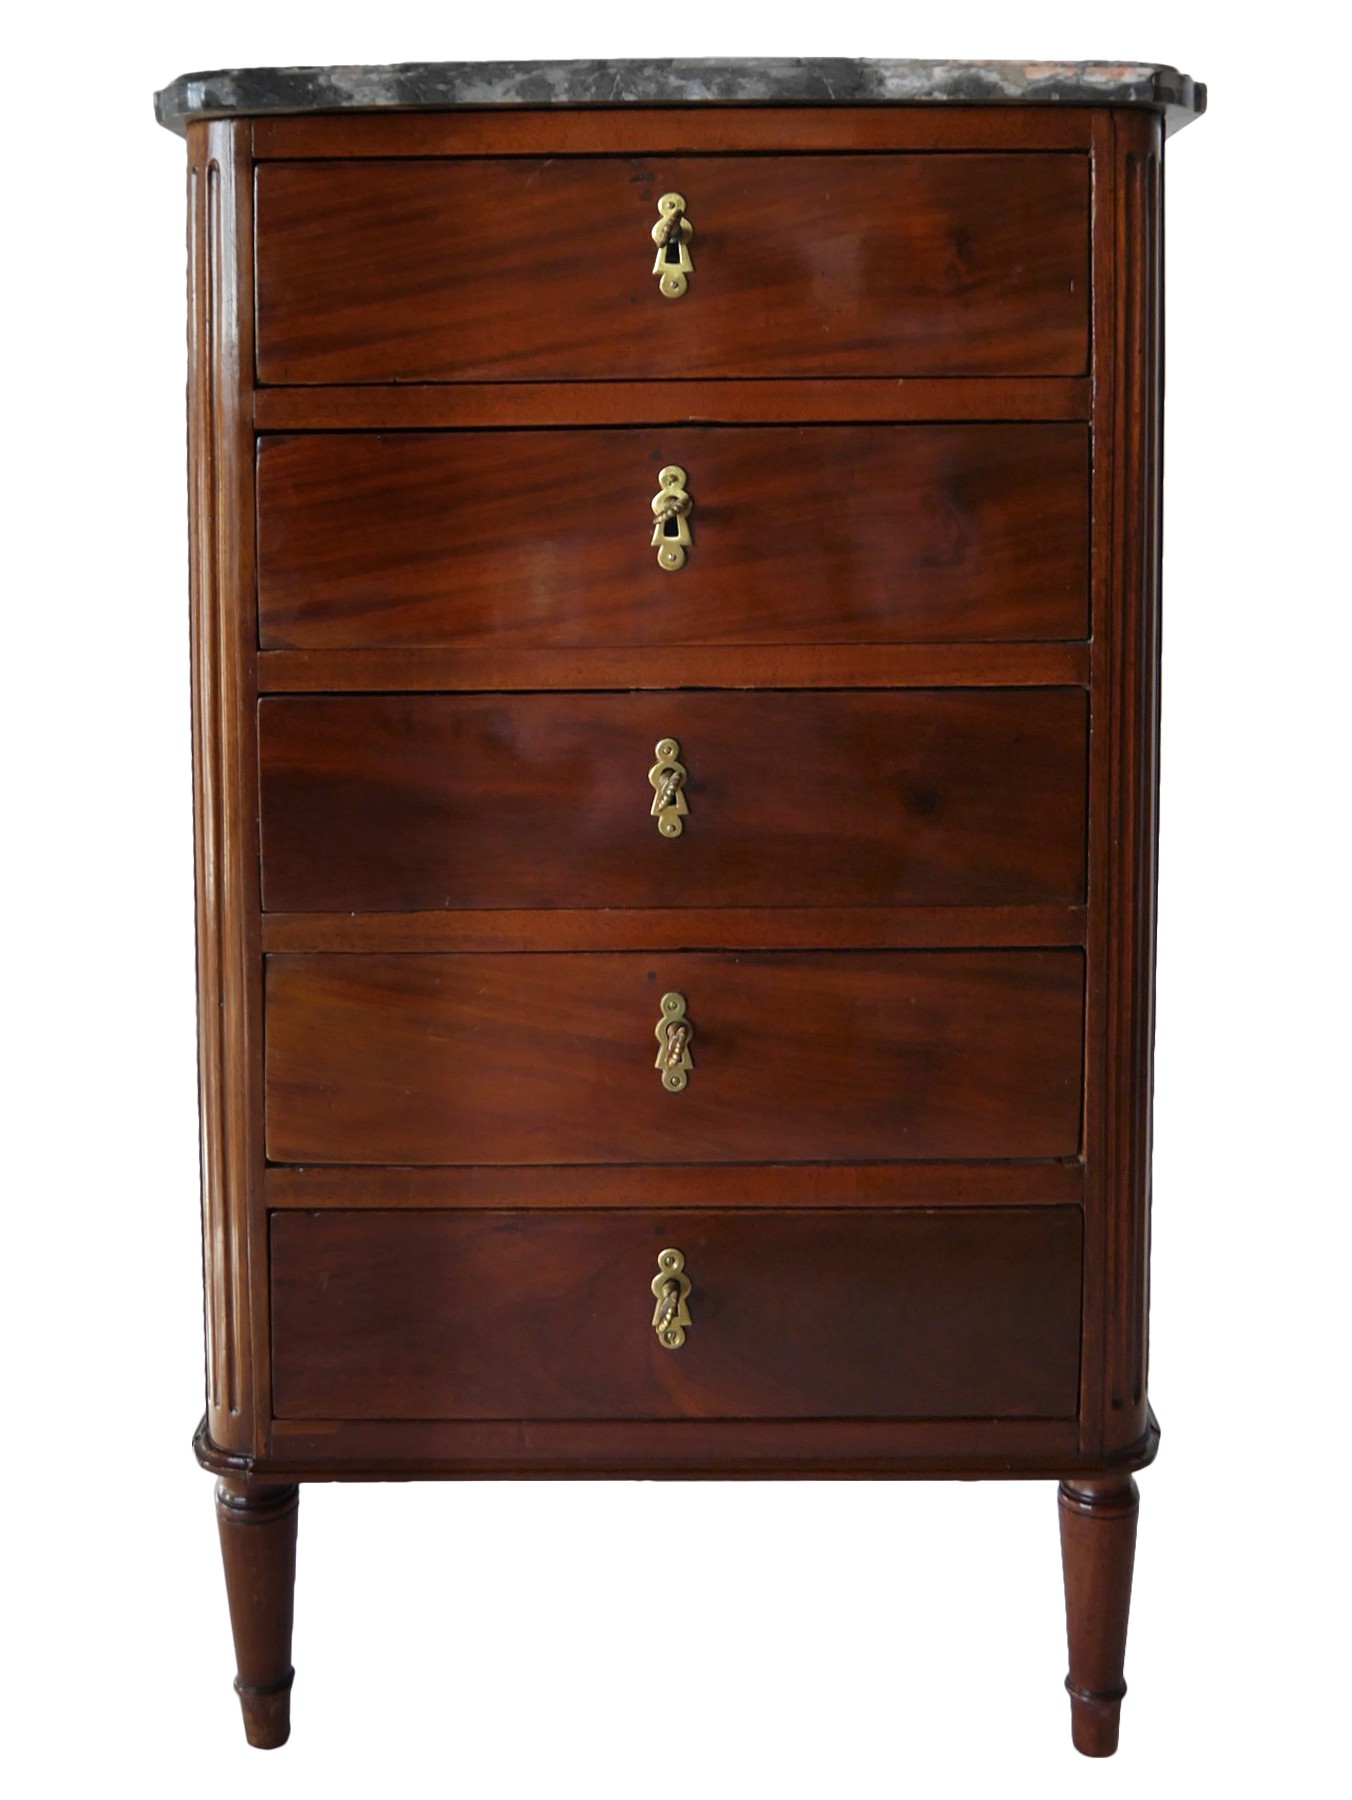 Small chest of drawers stamped L. Aubry - Ref.89139